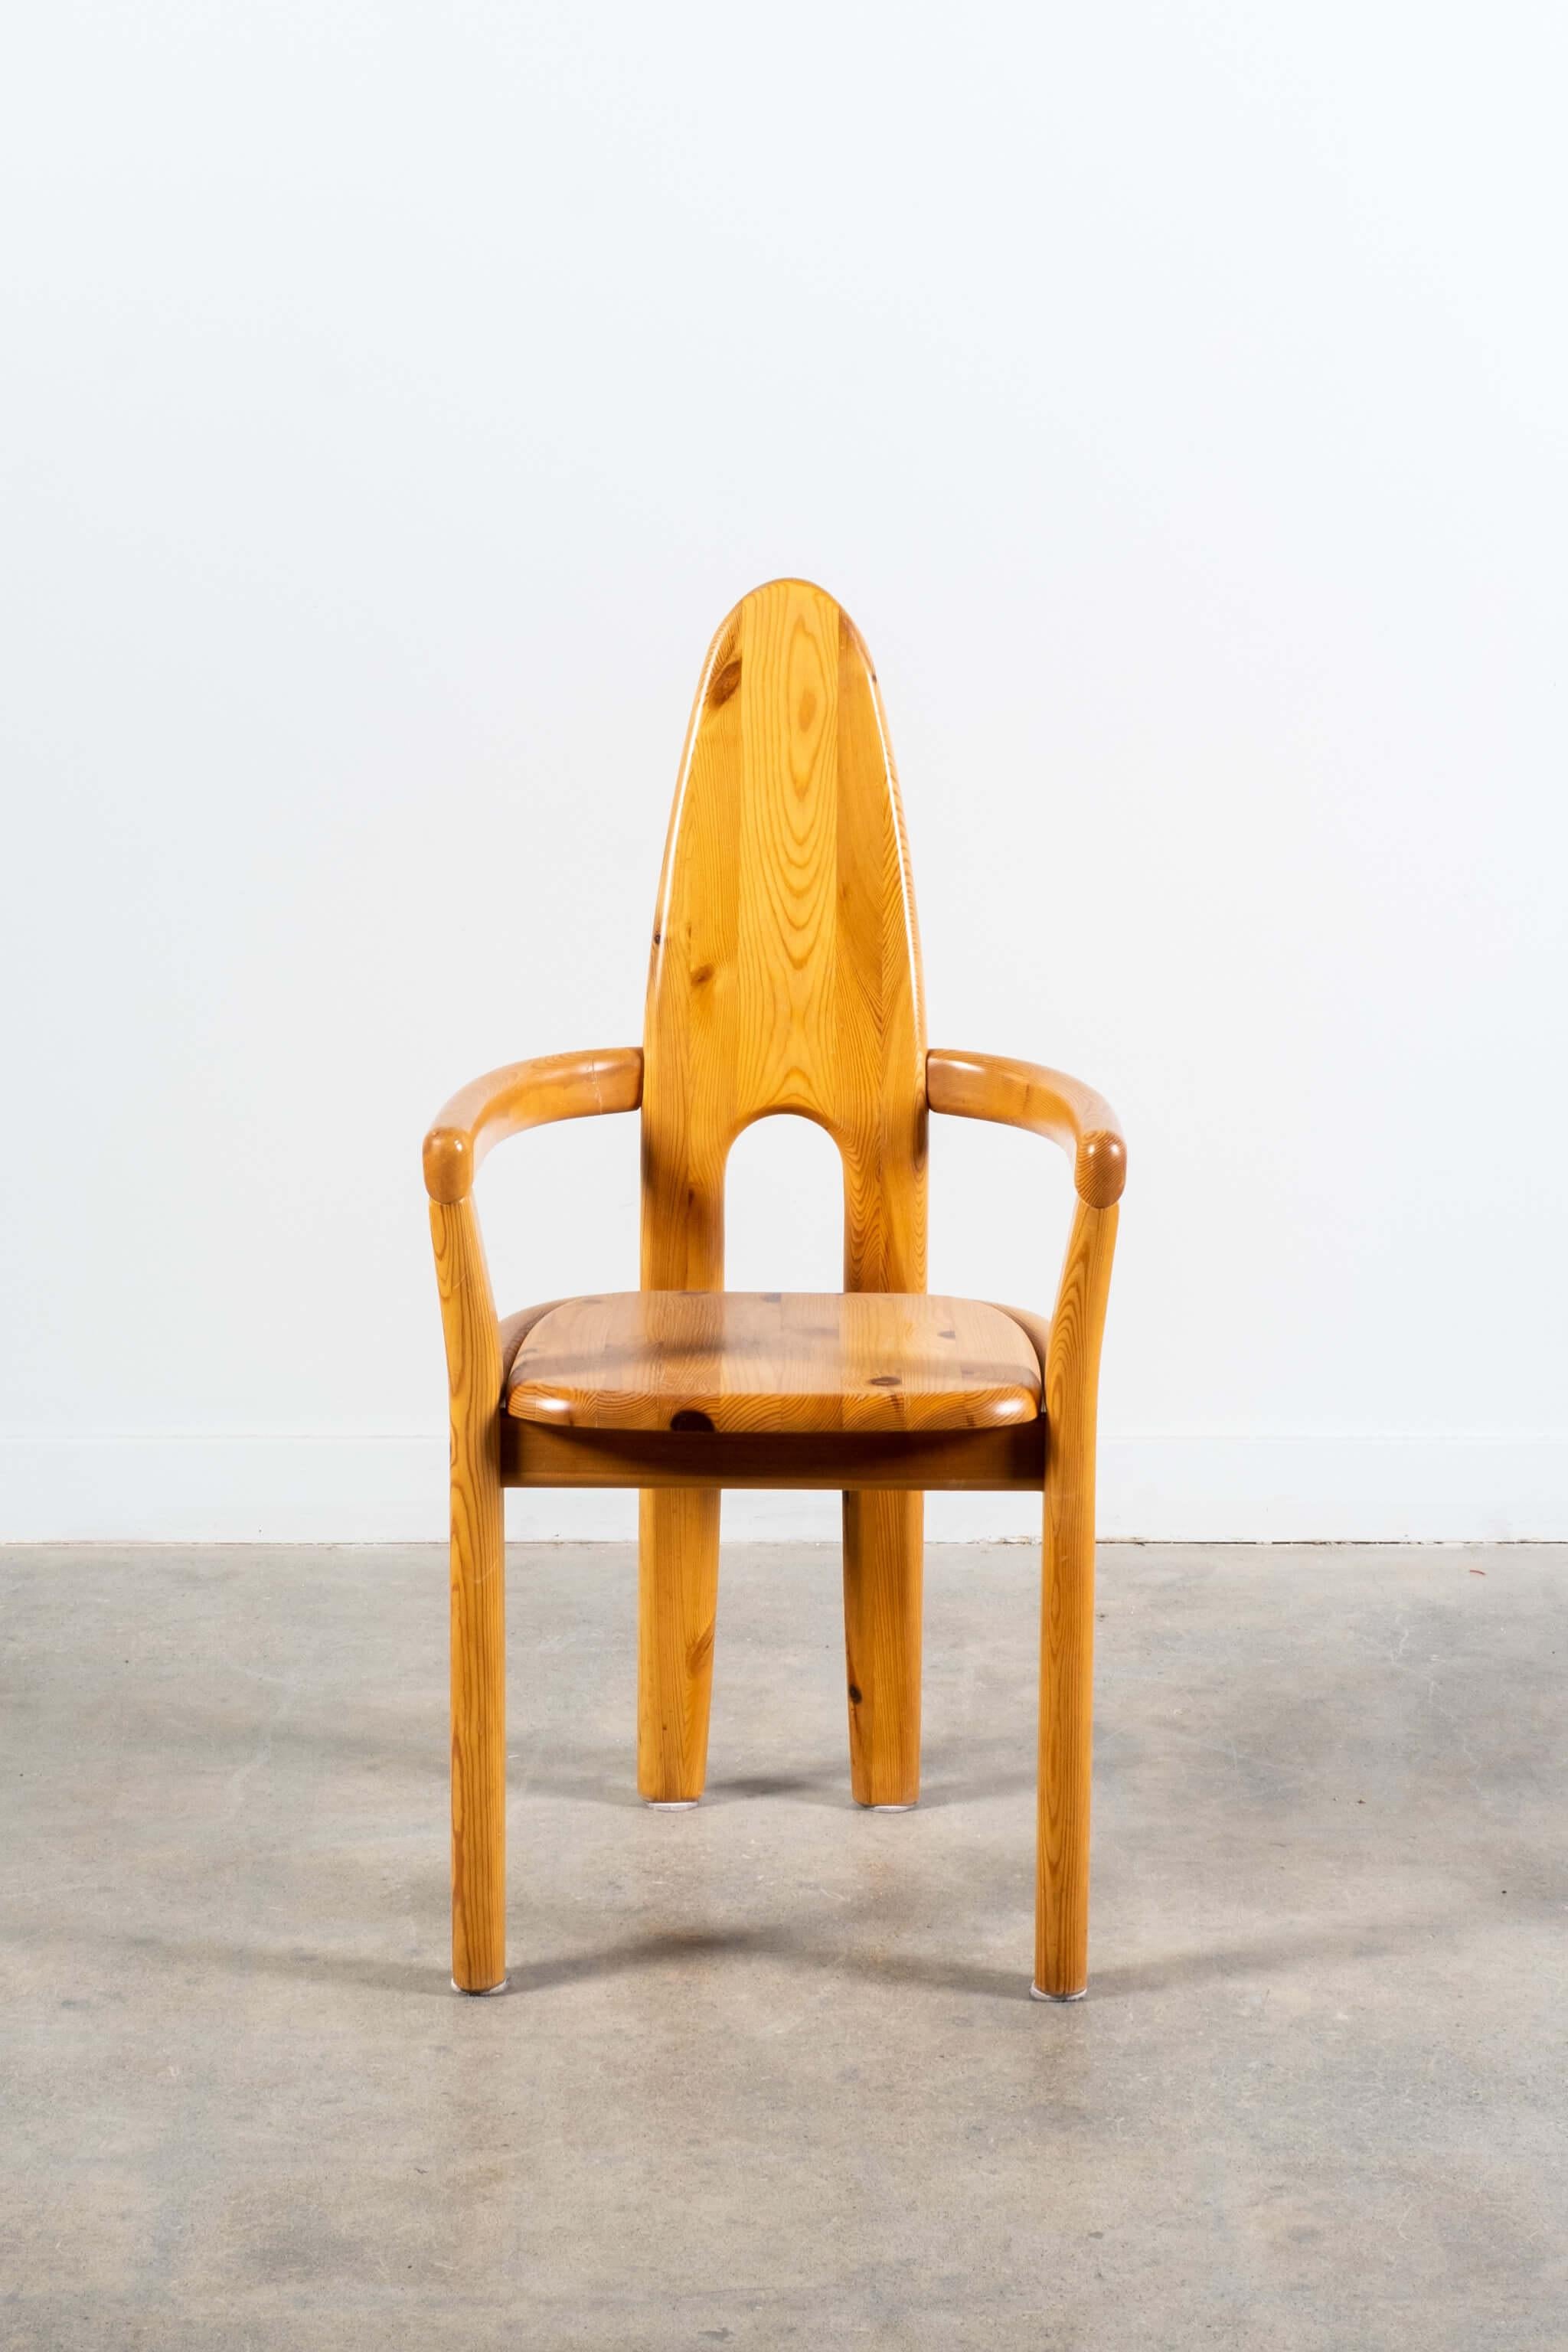 This rare set of chairs by German-born designer Rainer Daumiller exhibits a sculptural high back of solid pine. Solid in construction, simple in form, and sculptural in expression, their straightforward materiality and robust composition pay tribute